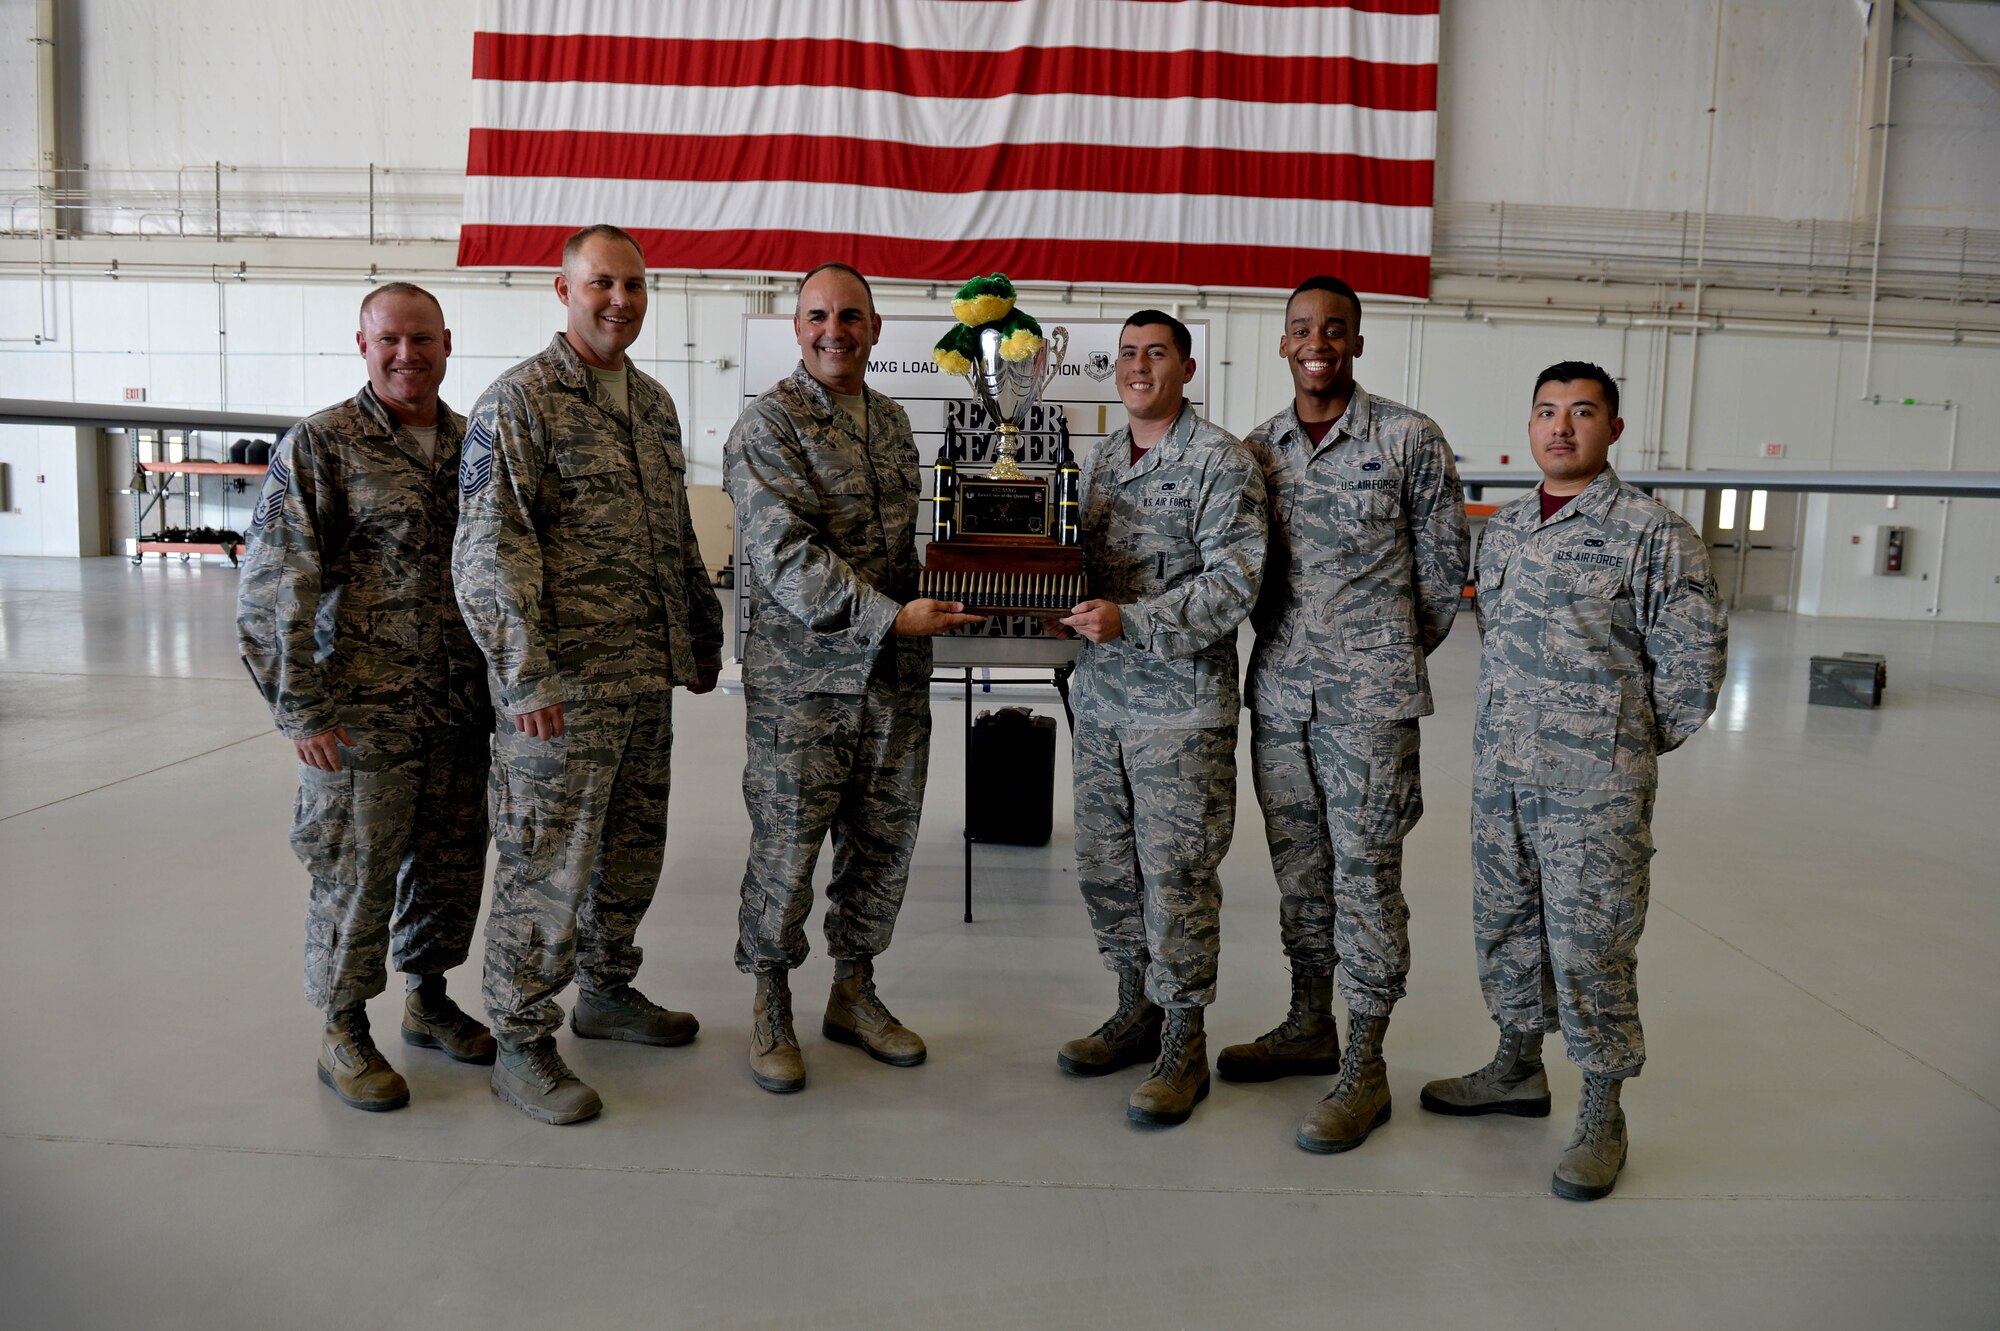 Airmen from the 432nd Aircraft Maintenance Squadron’s Reaper Aircraft Maintenance Unit pose with leadership for a photo July 1, 2016, at Creech Air Force Base, Nevada. The winners of this quarter’s Load Crew of the Quarter competition are Airman are: Senior Airman Dustin, 432nd AMXS load crew chief, Airman 1st Class Malik, 432nd AMXS load crew member, and Airman 1st Class Gabriel, 432nd AMXS load crew member.